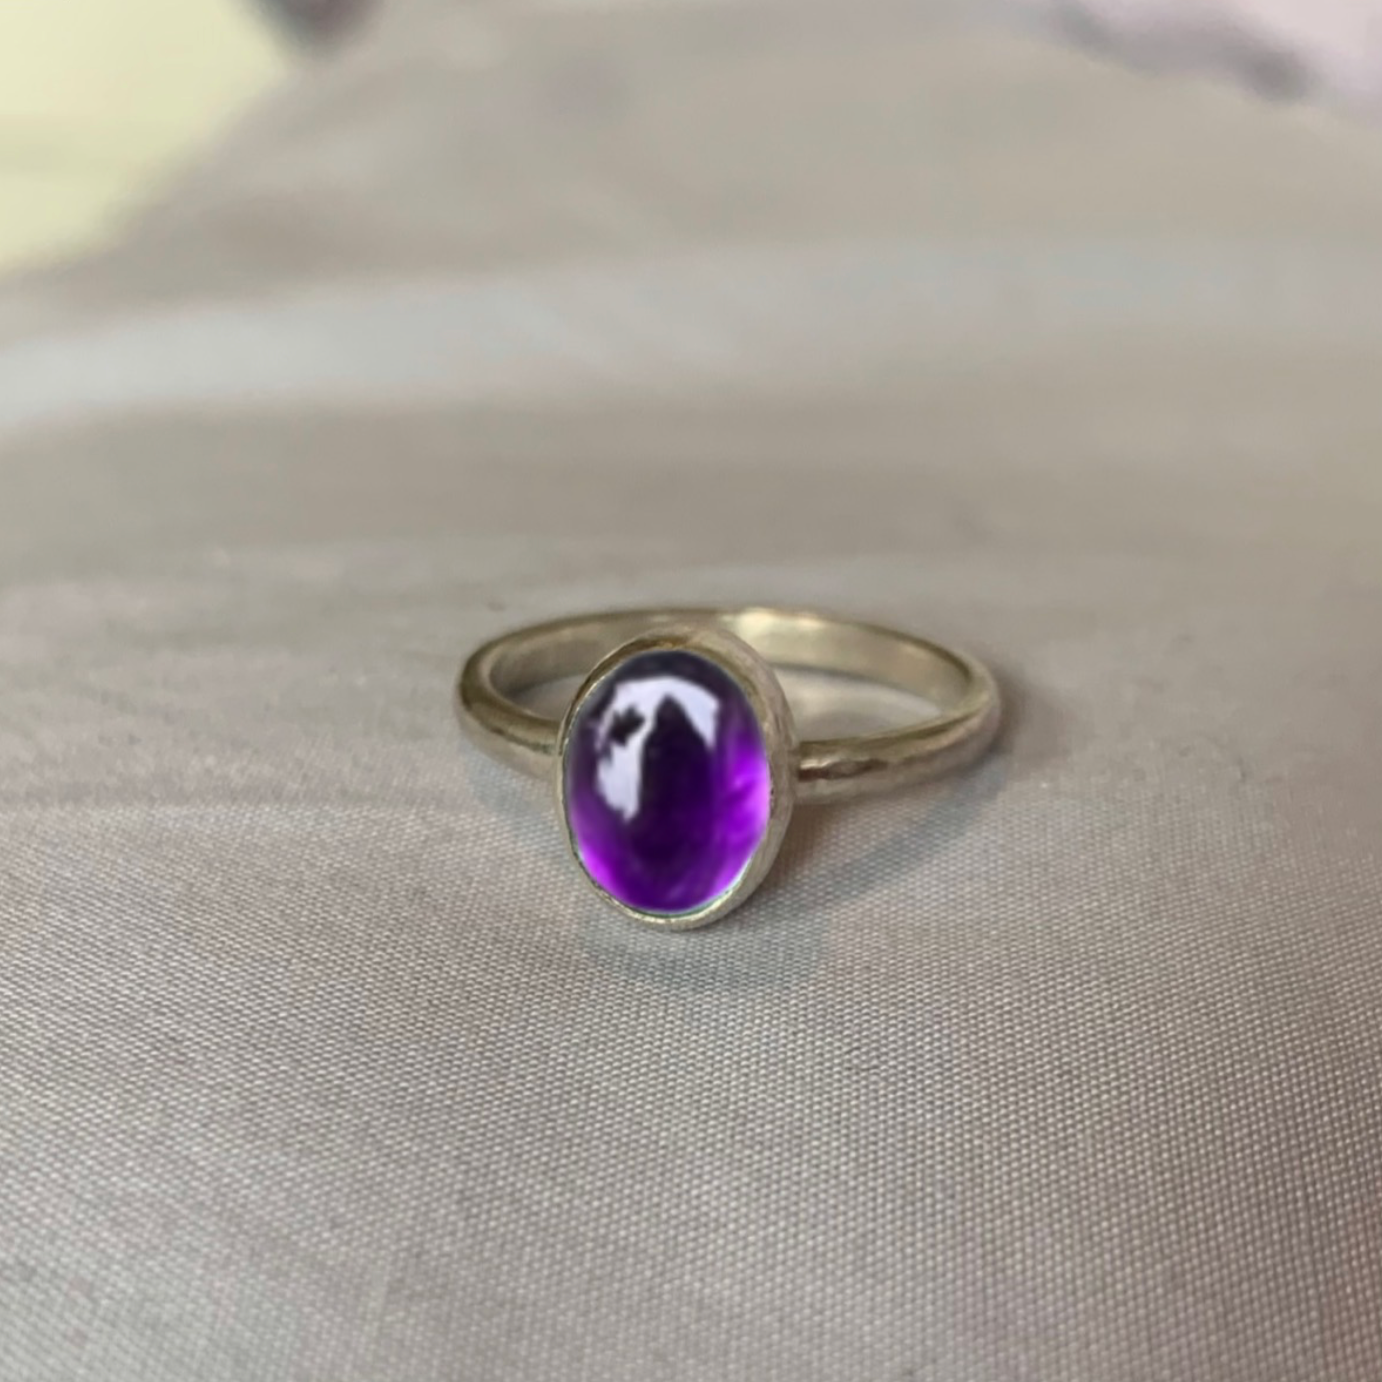 Large oval gemstone ring without engraving